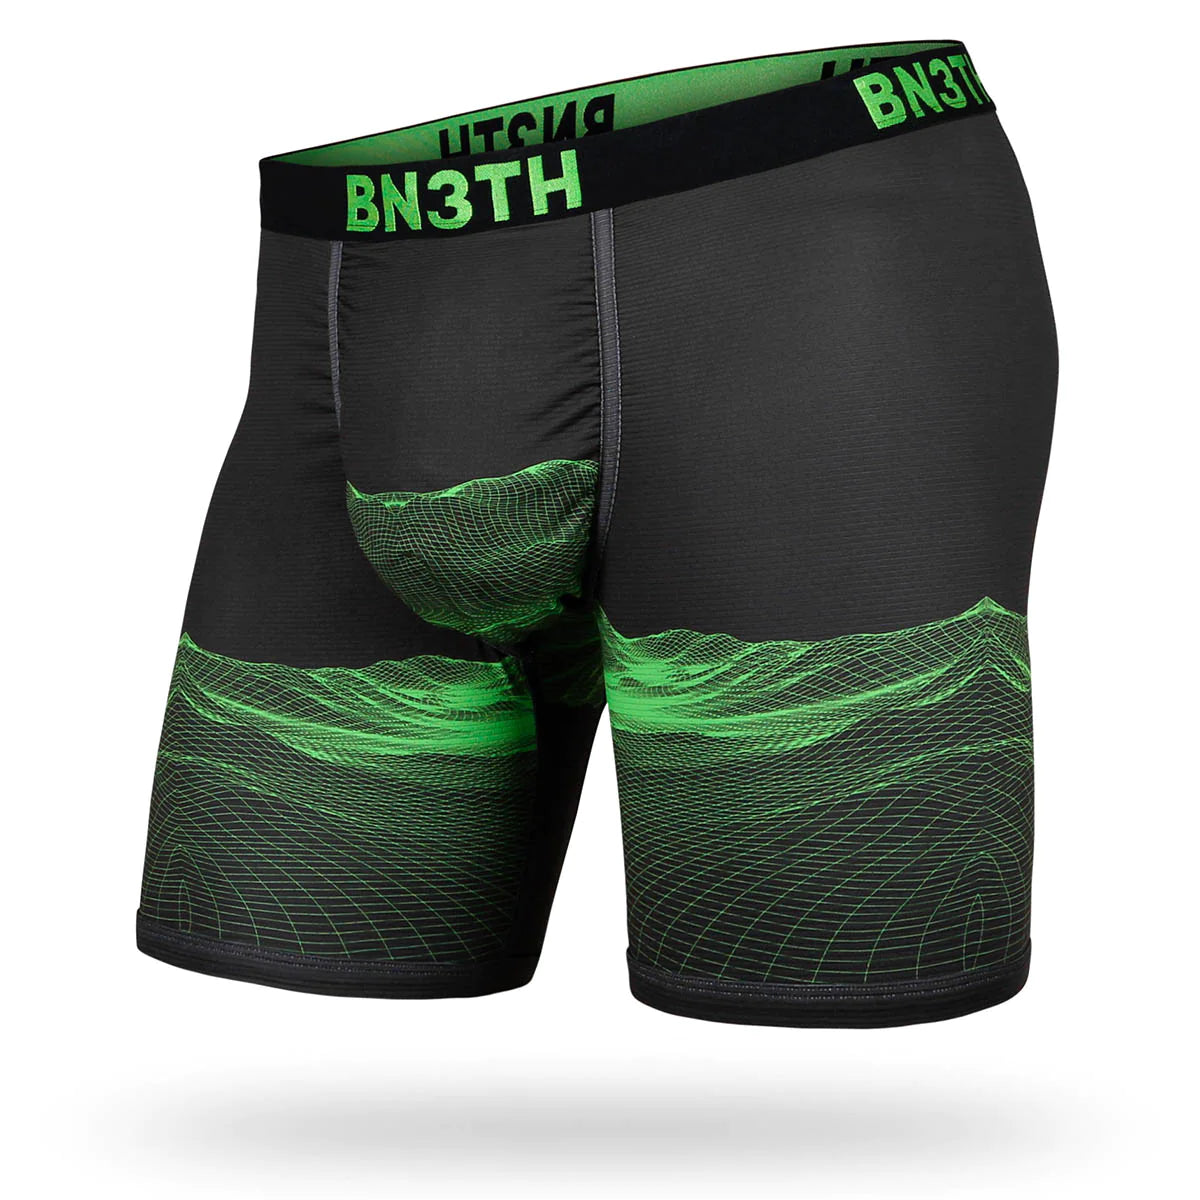 Bn3th - Pro Ionic+ Boxer Brief : Meridian Green